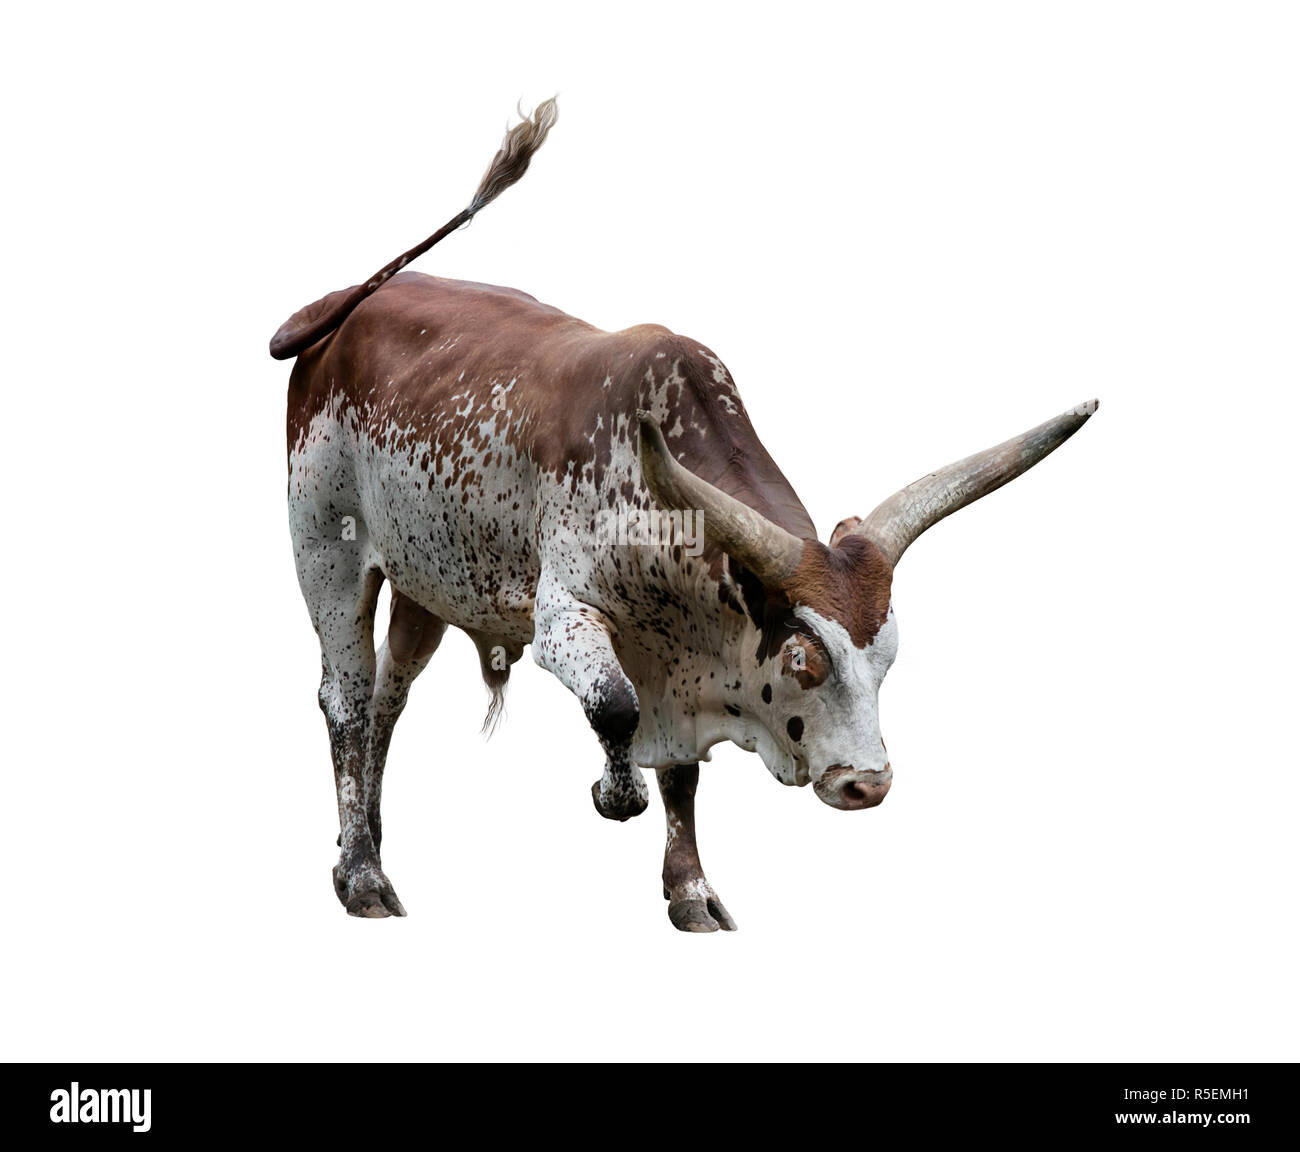 Brown and white longhorn steer Stock Photo